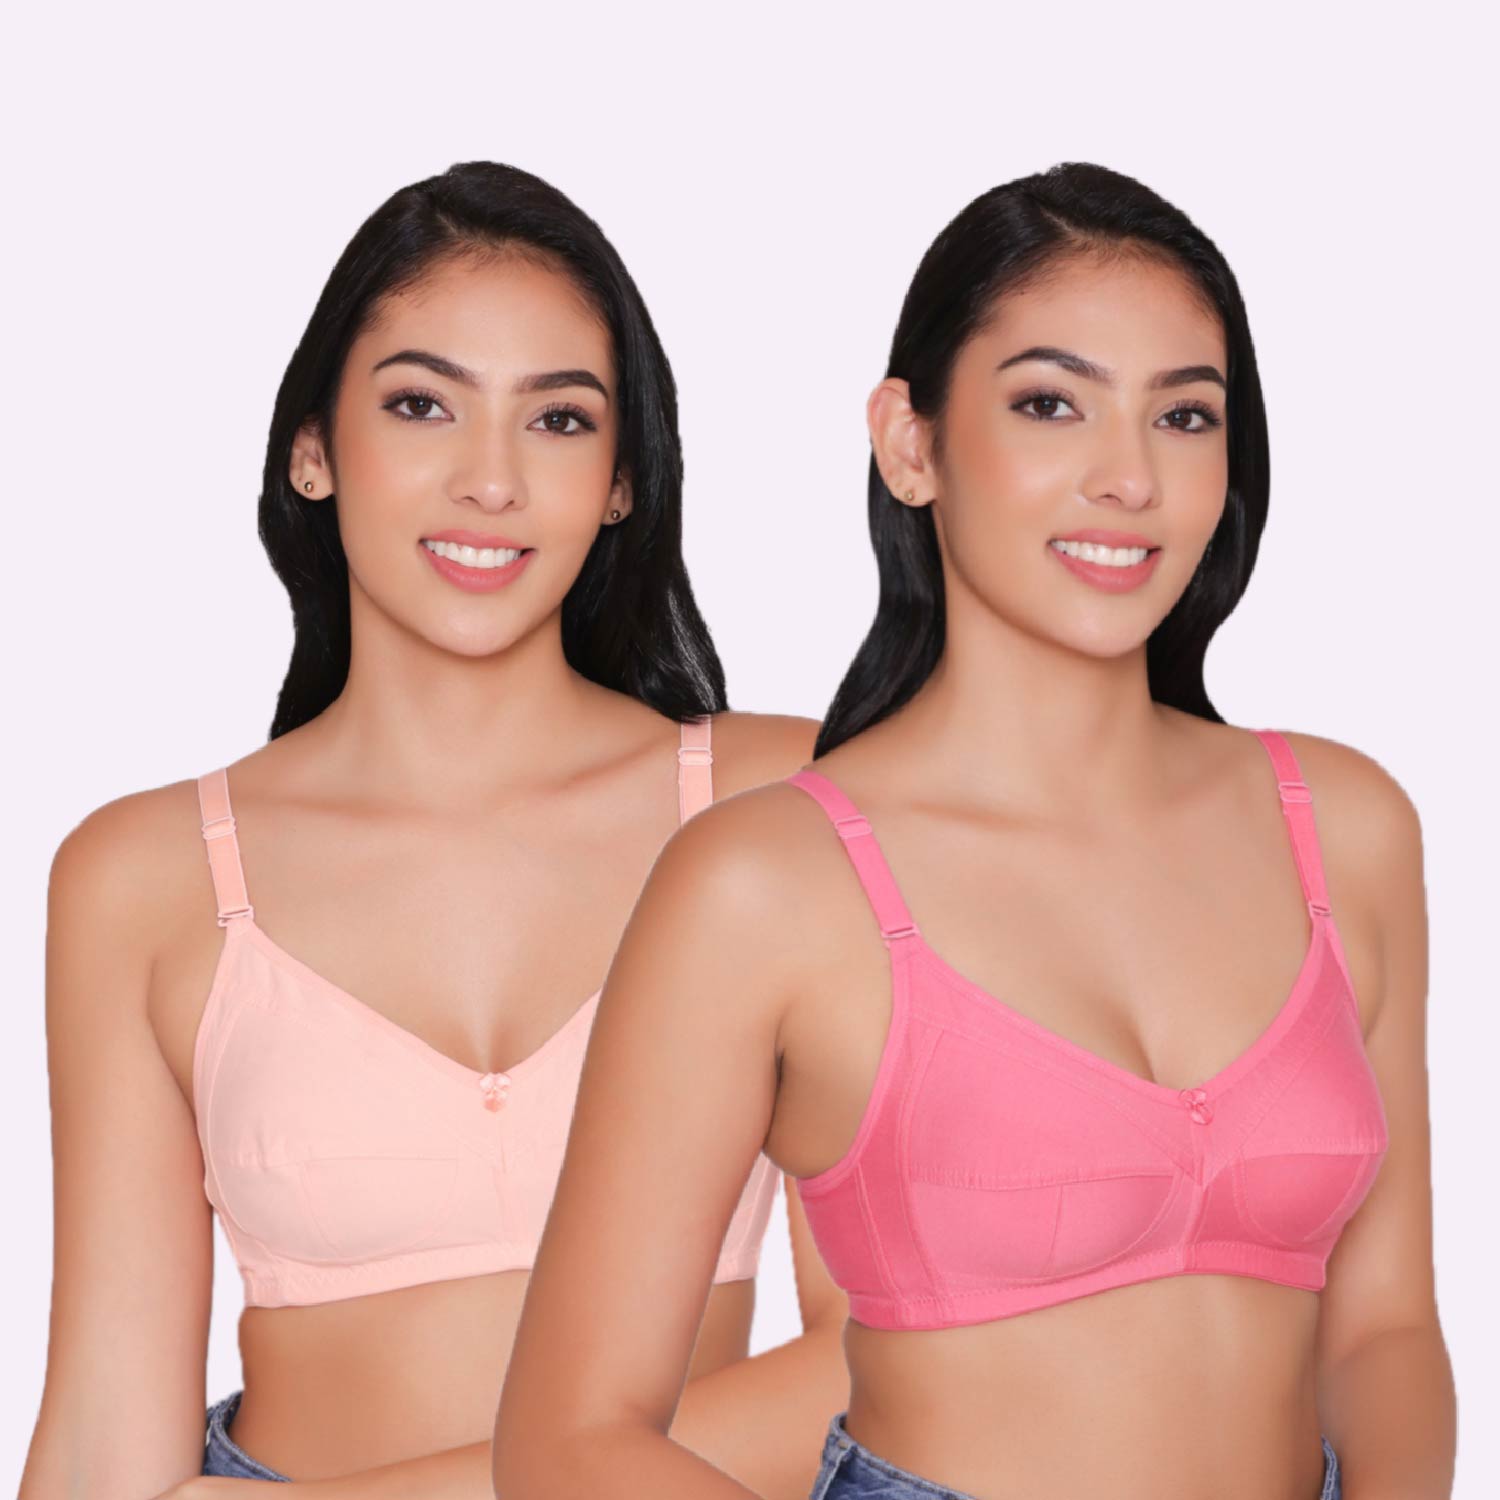 Women's Padded Non Wired Full Coverage Bra with No Spillage